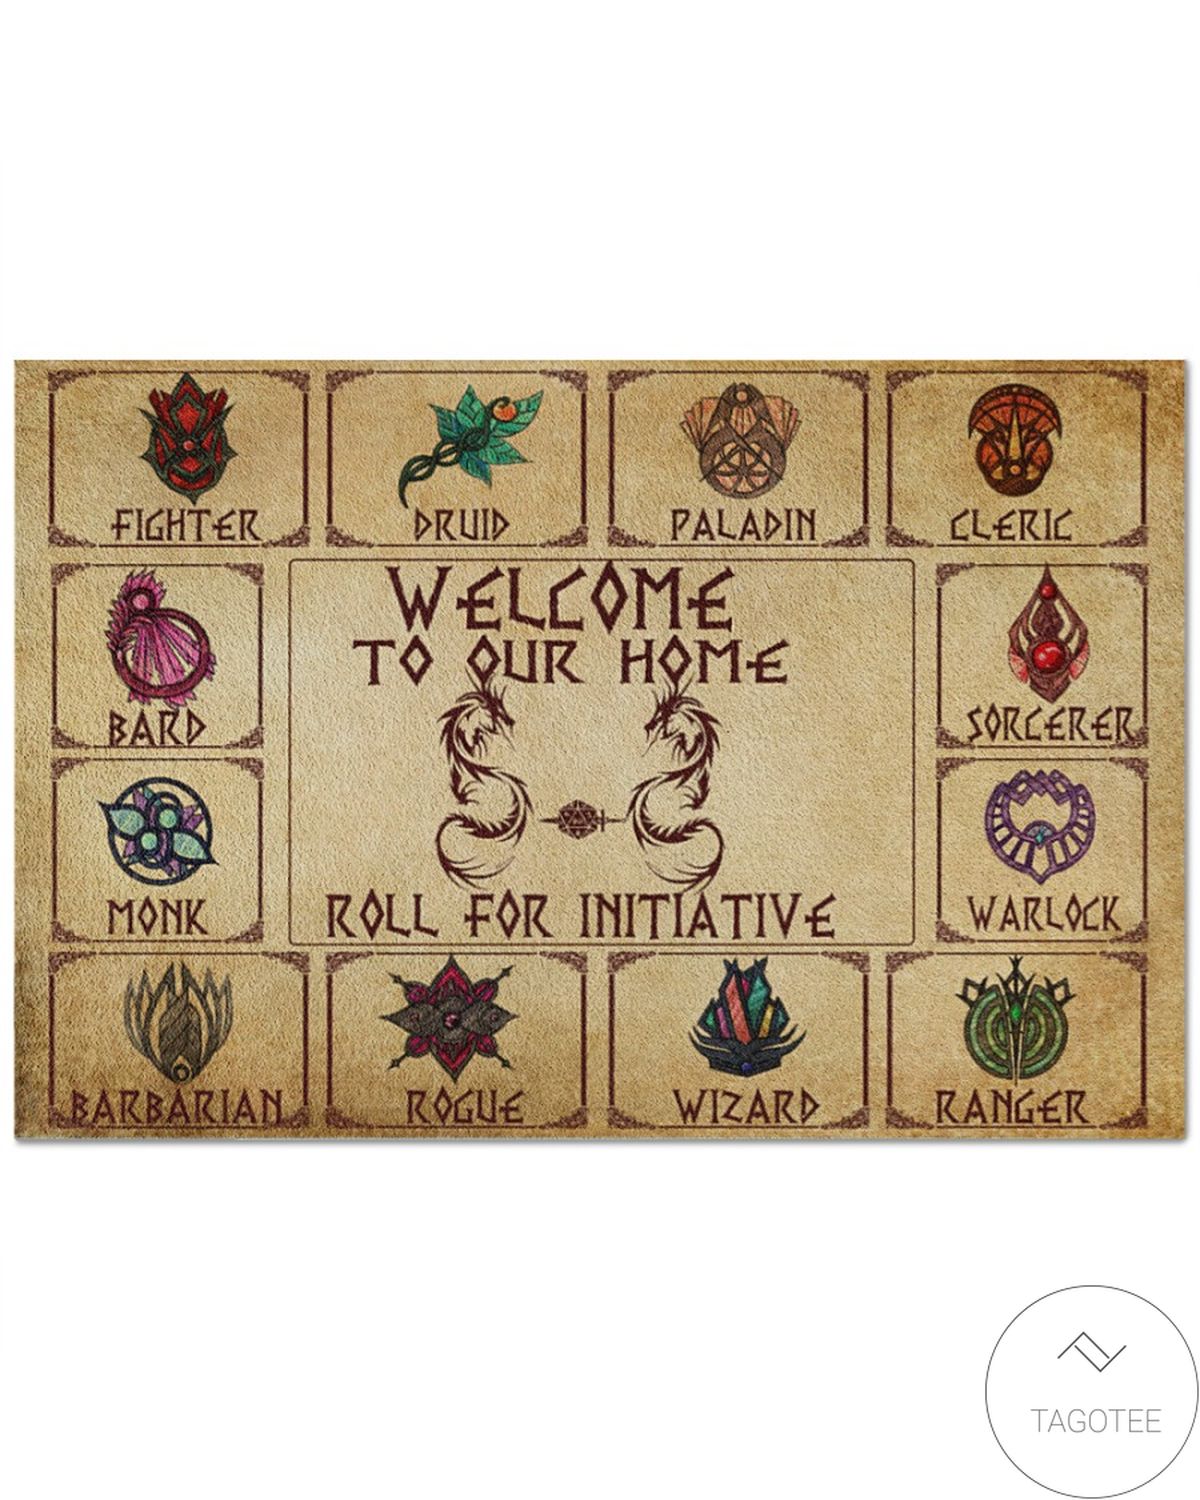 Fighter Druid Paladin Cleric Bard Welcome To Our Home D&D Doormat